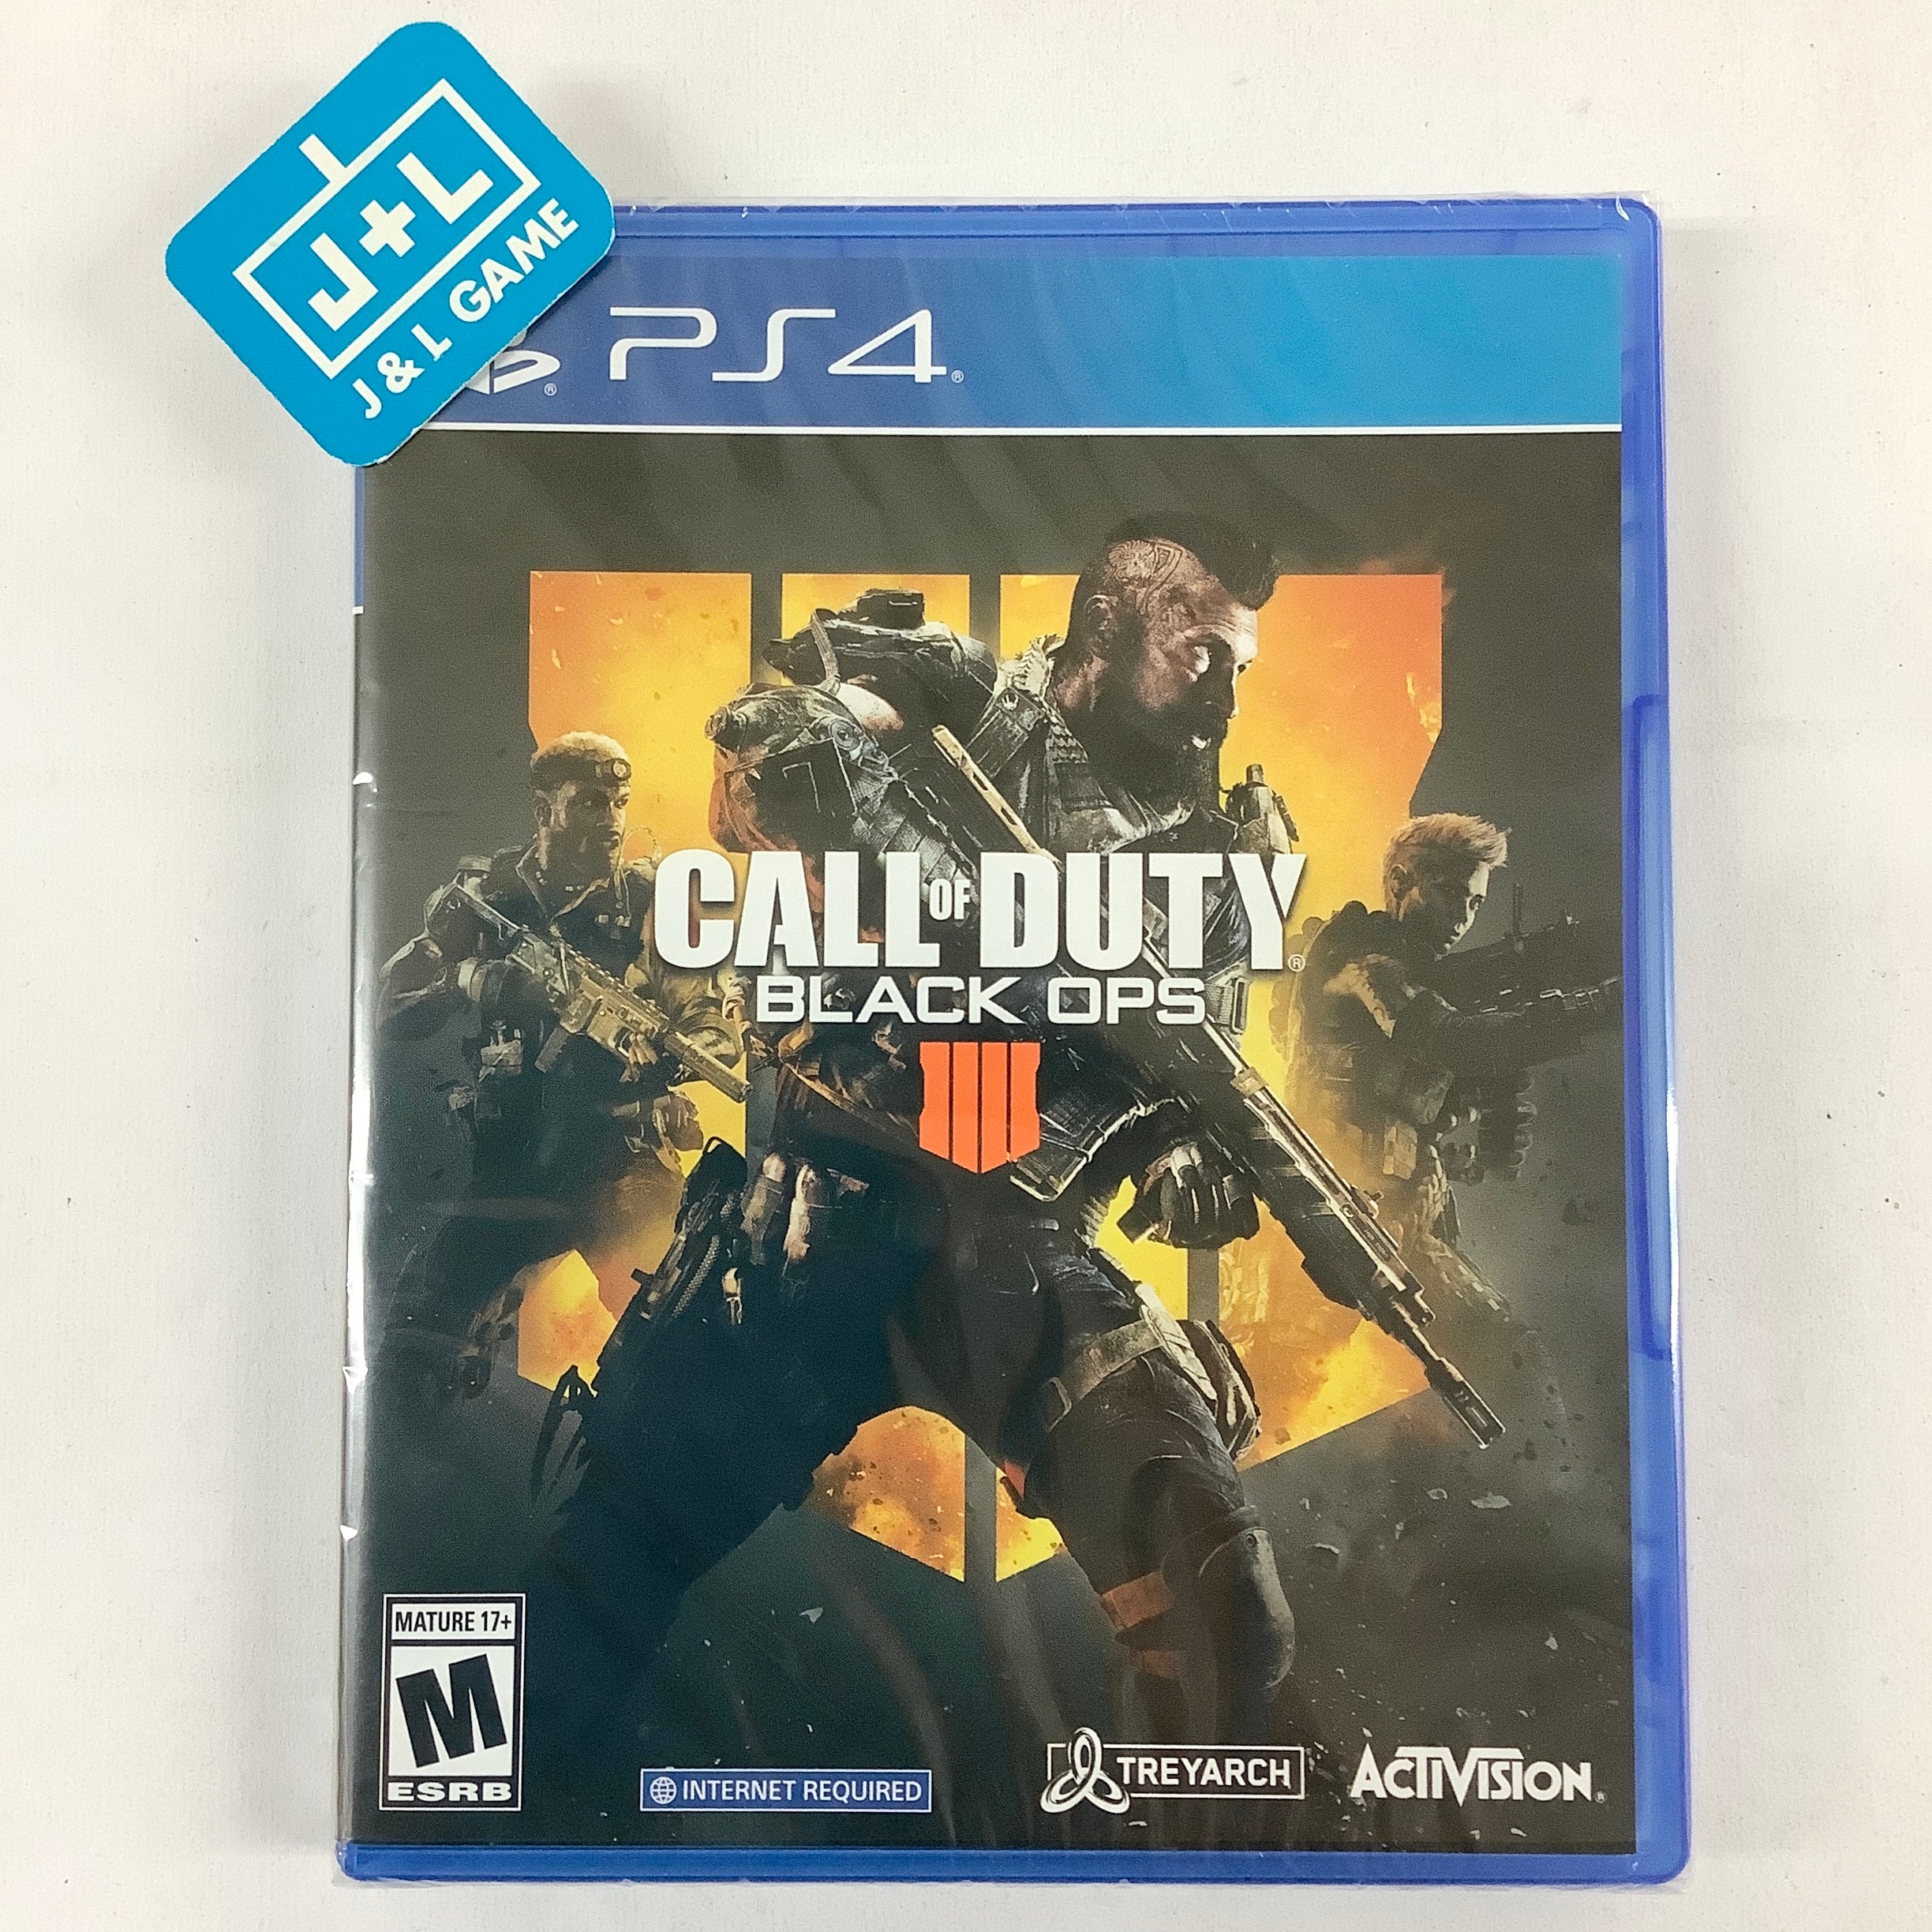 Call of Duty: Black Ops IIII - (PS4) PlayStation 4 Video Games ACTIVISION   